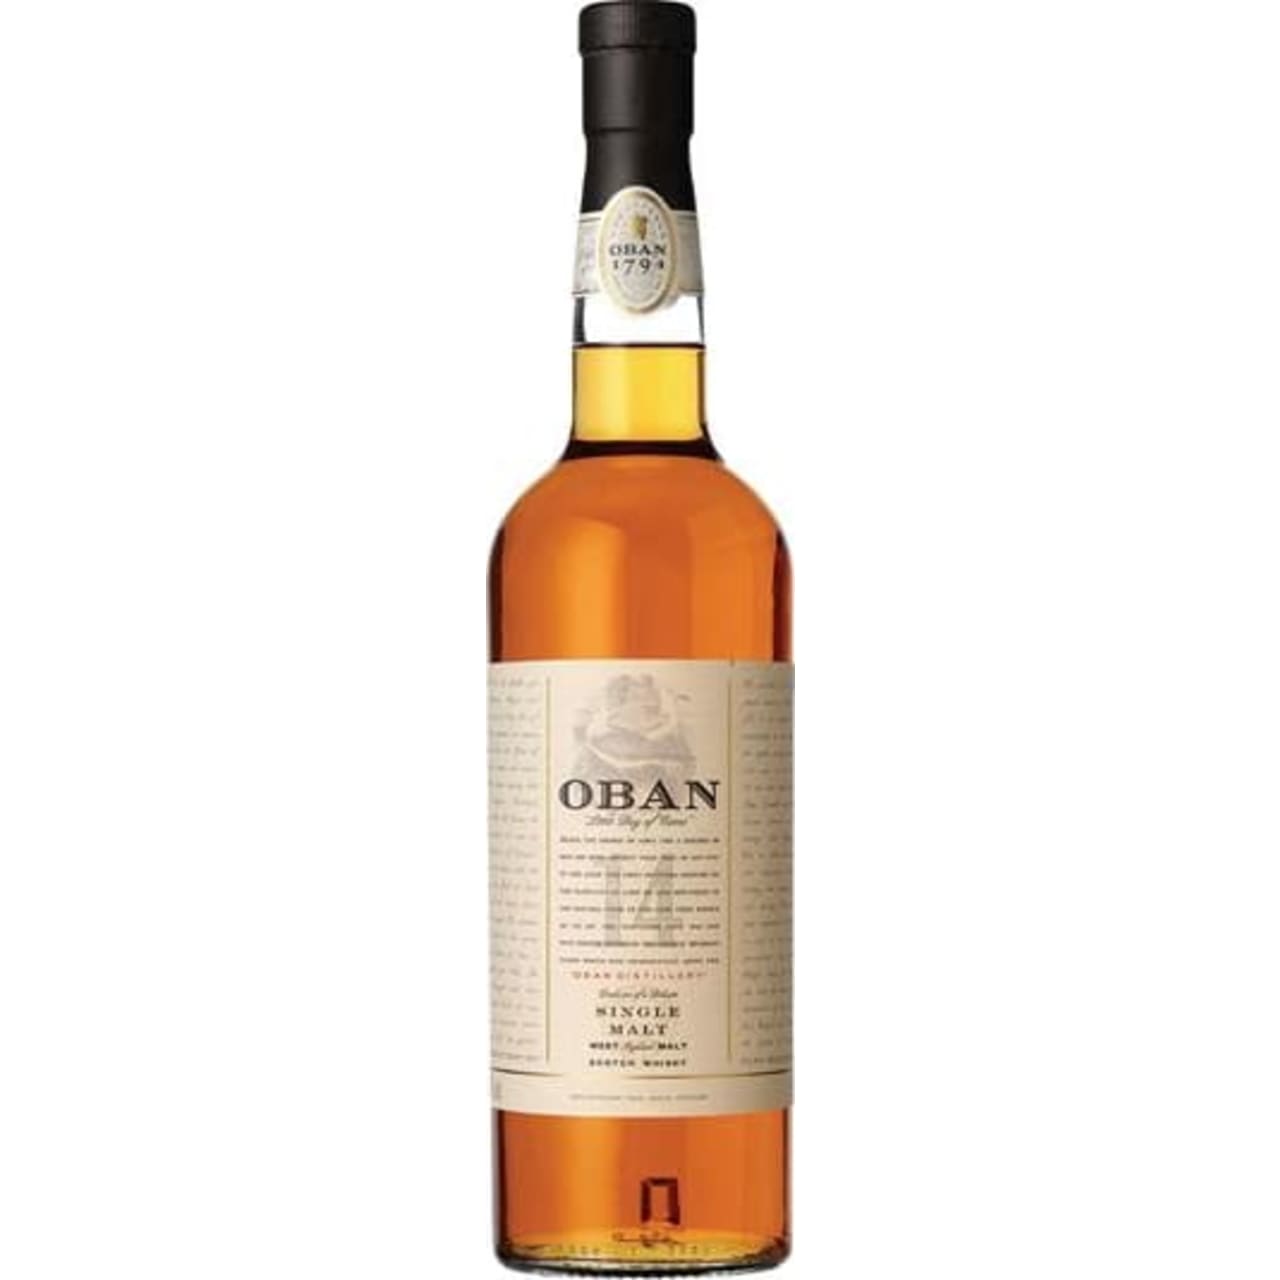 Rich sweet fruity nose of oranges, lemons and pears, with sea-salt and peaty smoke. Full, rich palate of autumn fruits, figs, honey and spices followed by a smoky malty dryness. Smooth sweet finish hints of oak-wood and touch of salt.